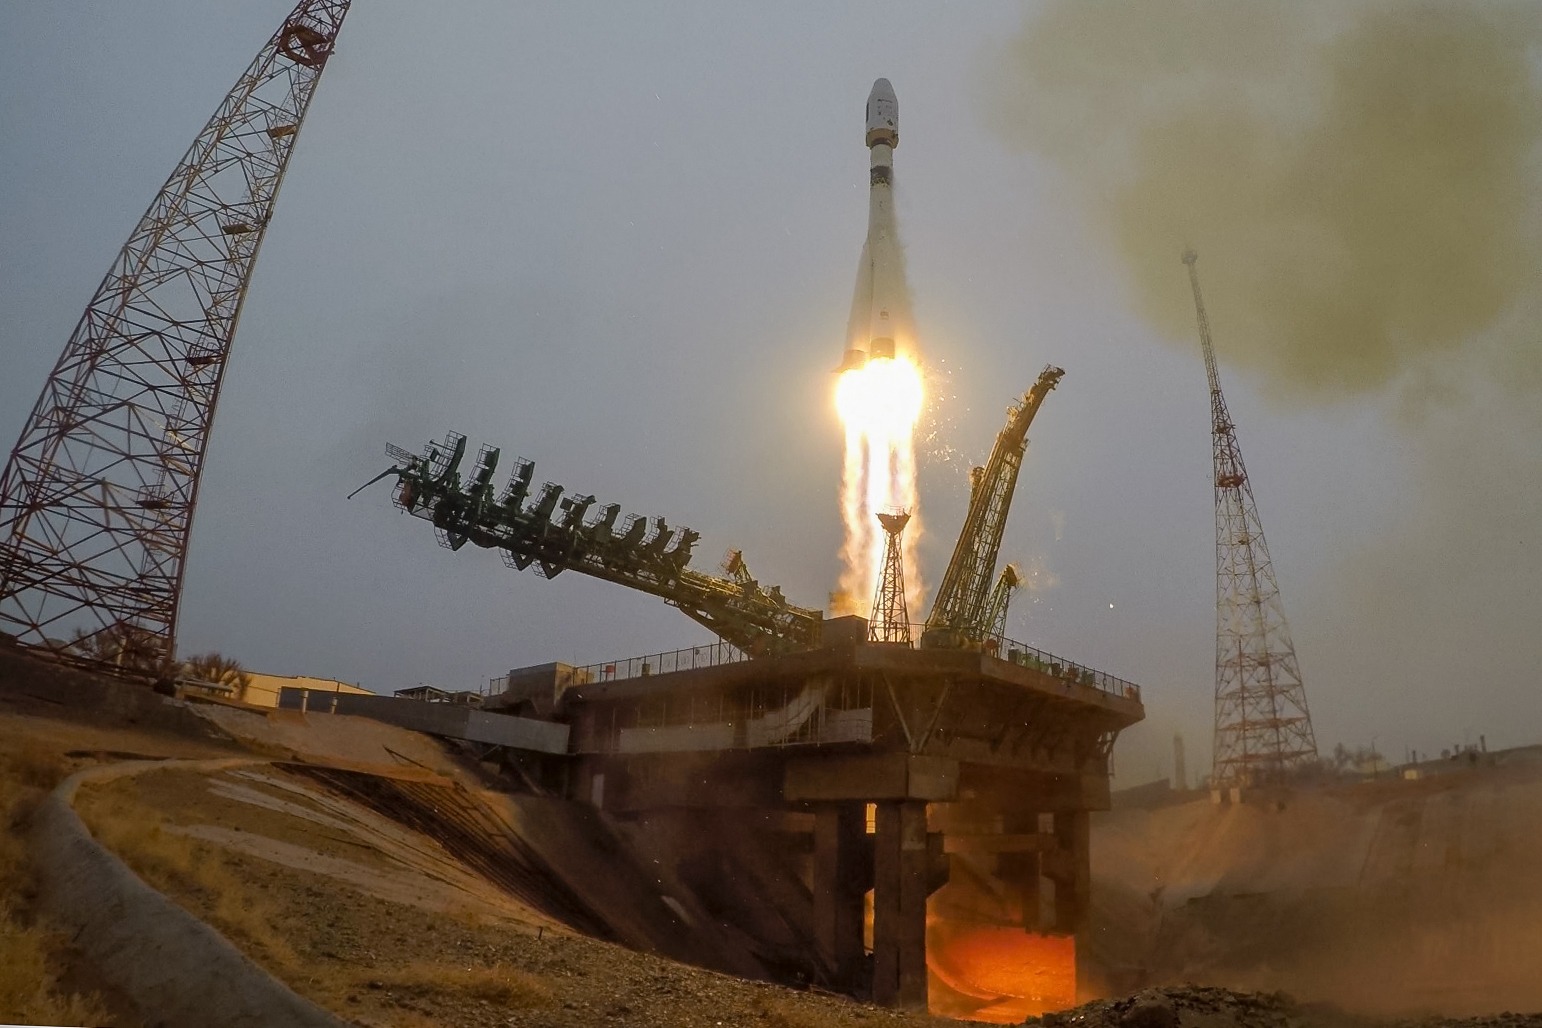 ISILAUNCH27 Soyuz-2 Rocket launch campaign